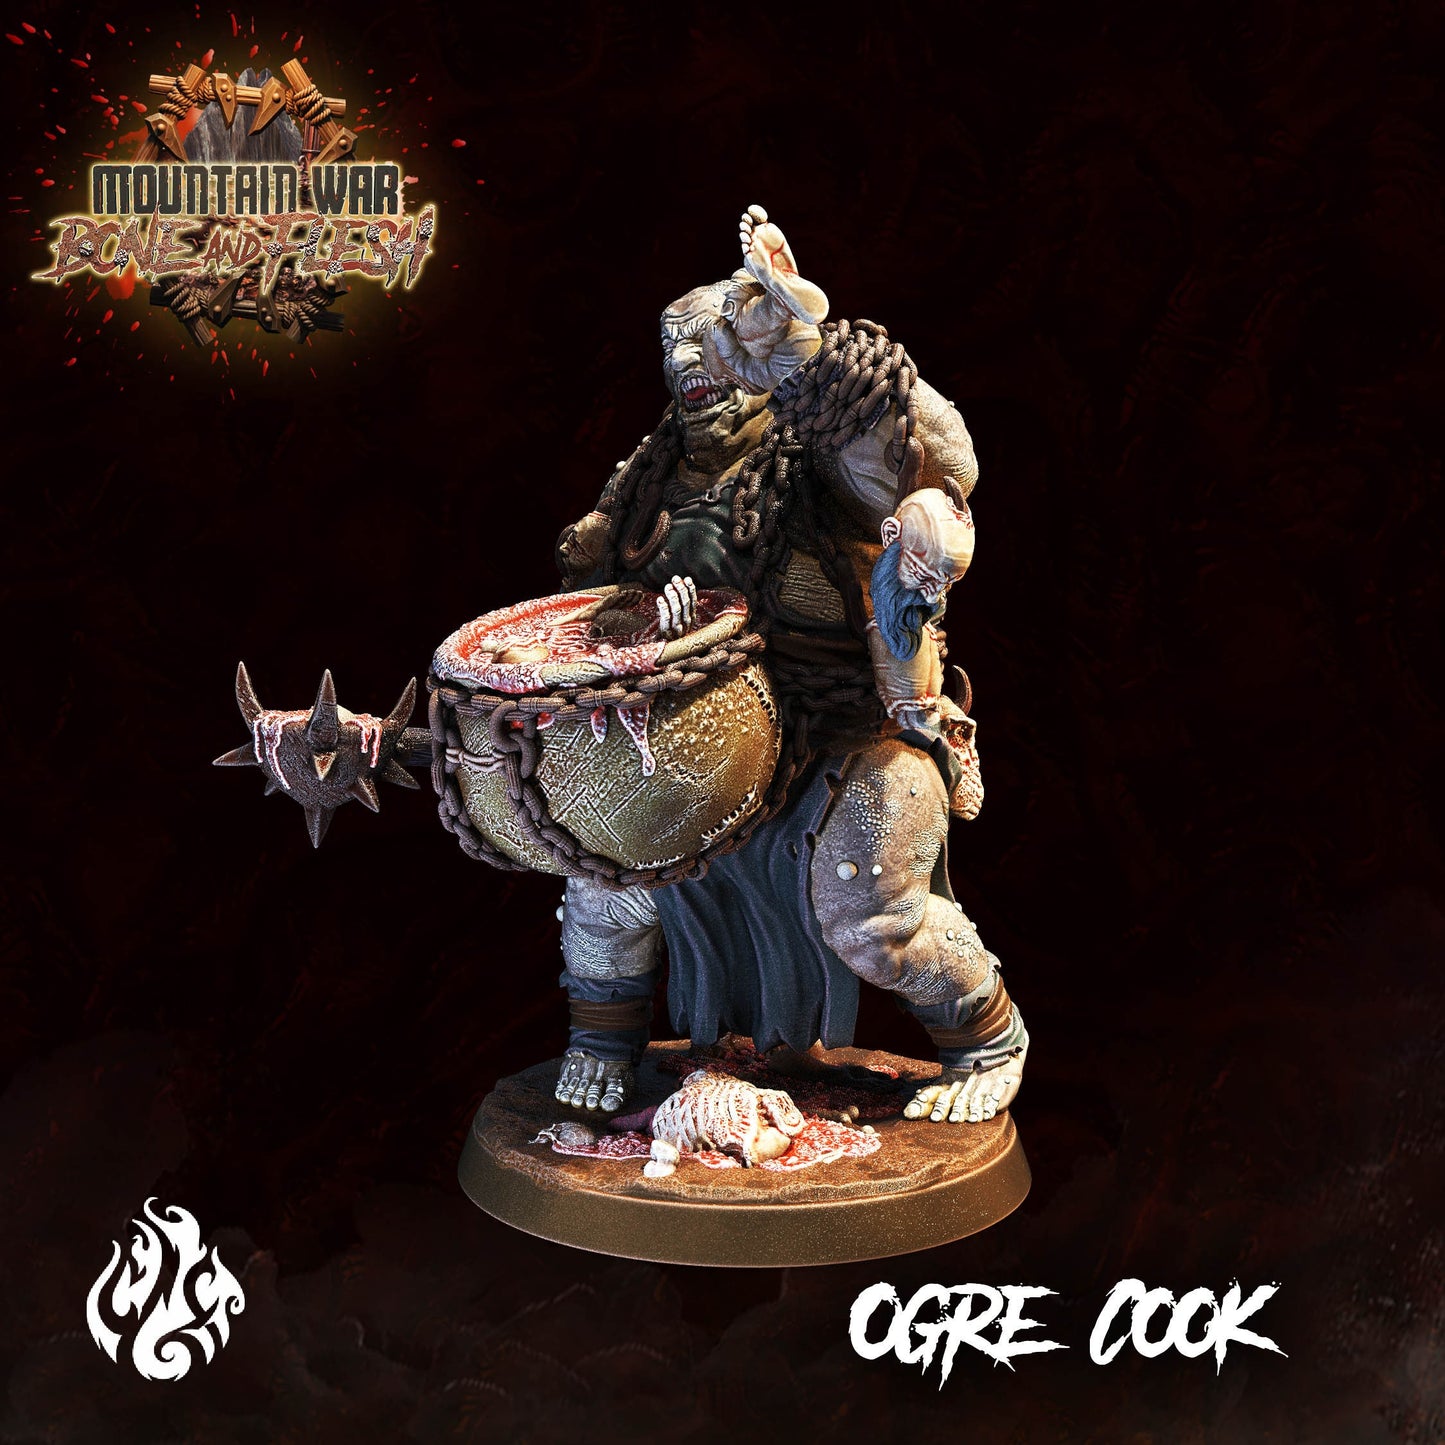 Ogre Cook Miniature - by Crippled God Foundry | Ogre Warriors | DnD | Dungeons & Dragons | Pathfinder | Warhammer